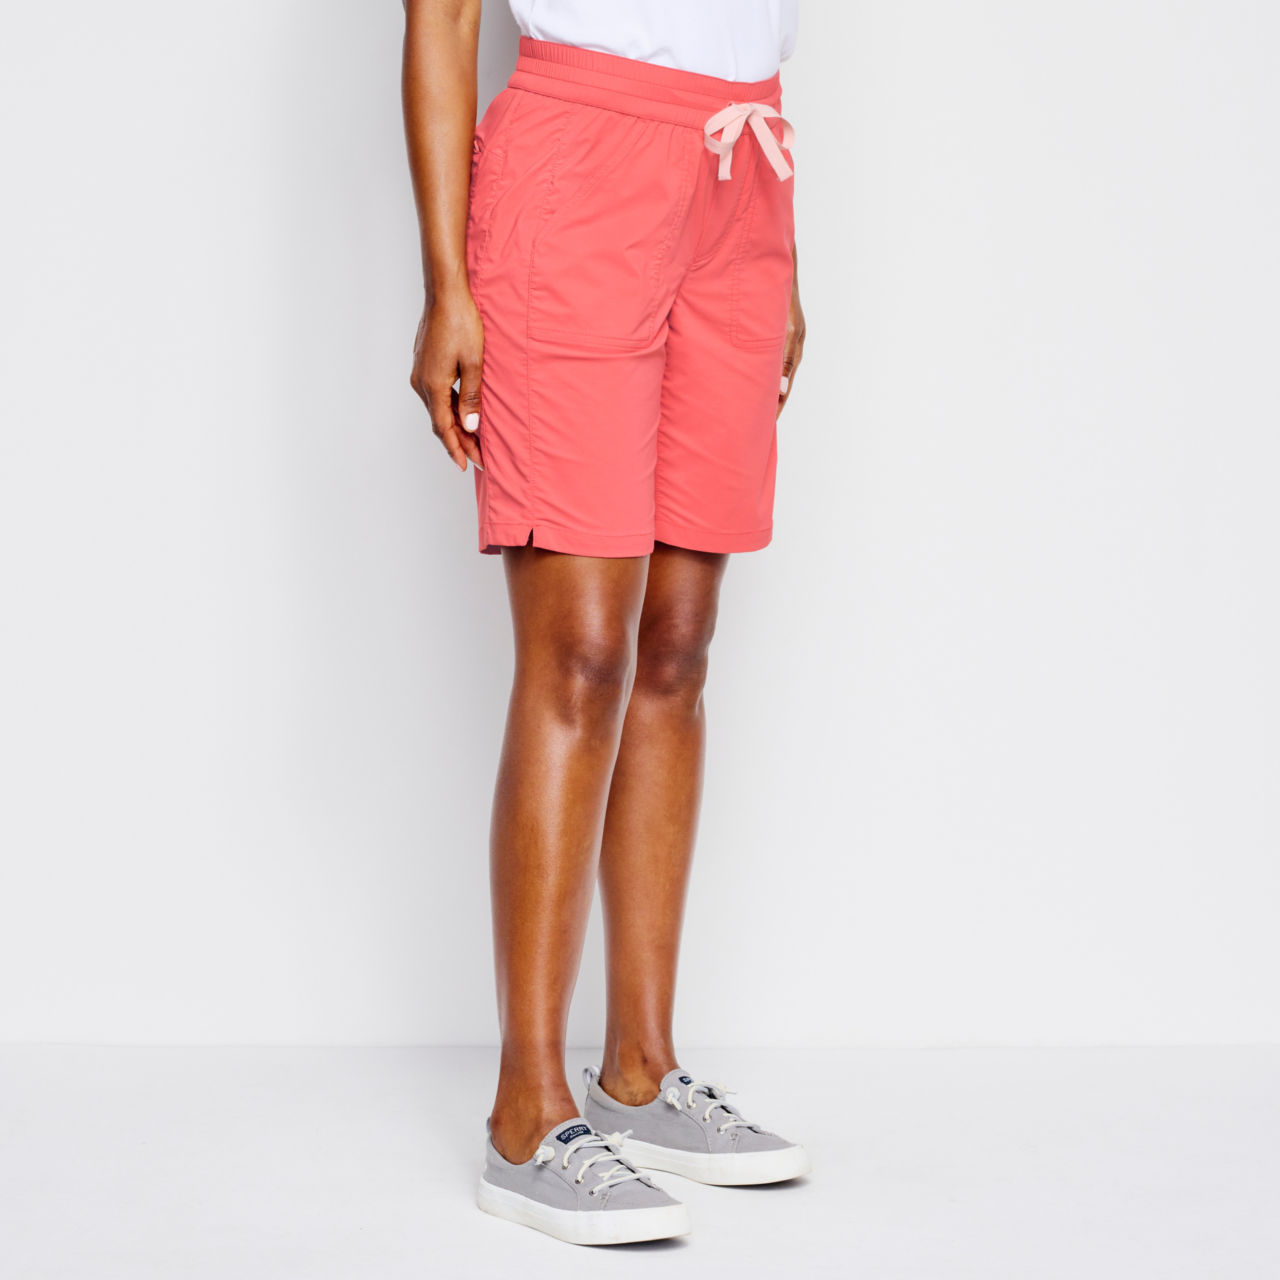 All-Around Relaxed Fit 8" Shorts -  image number 3